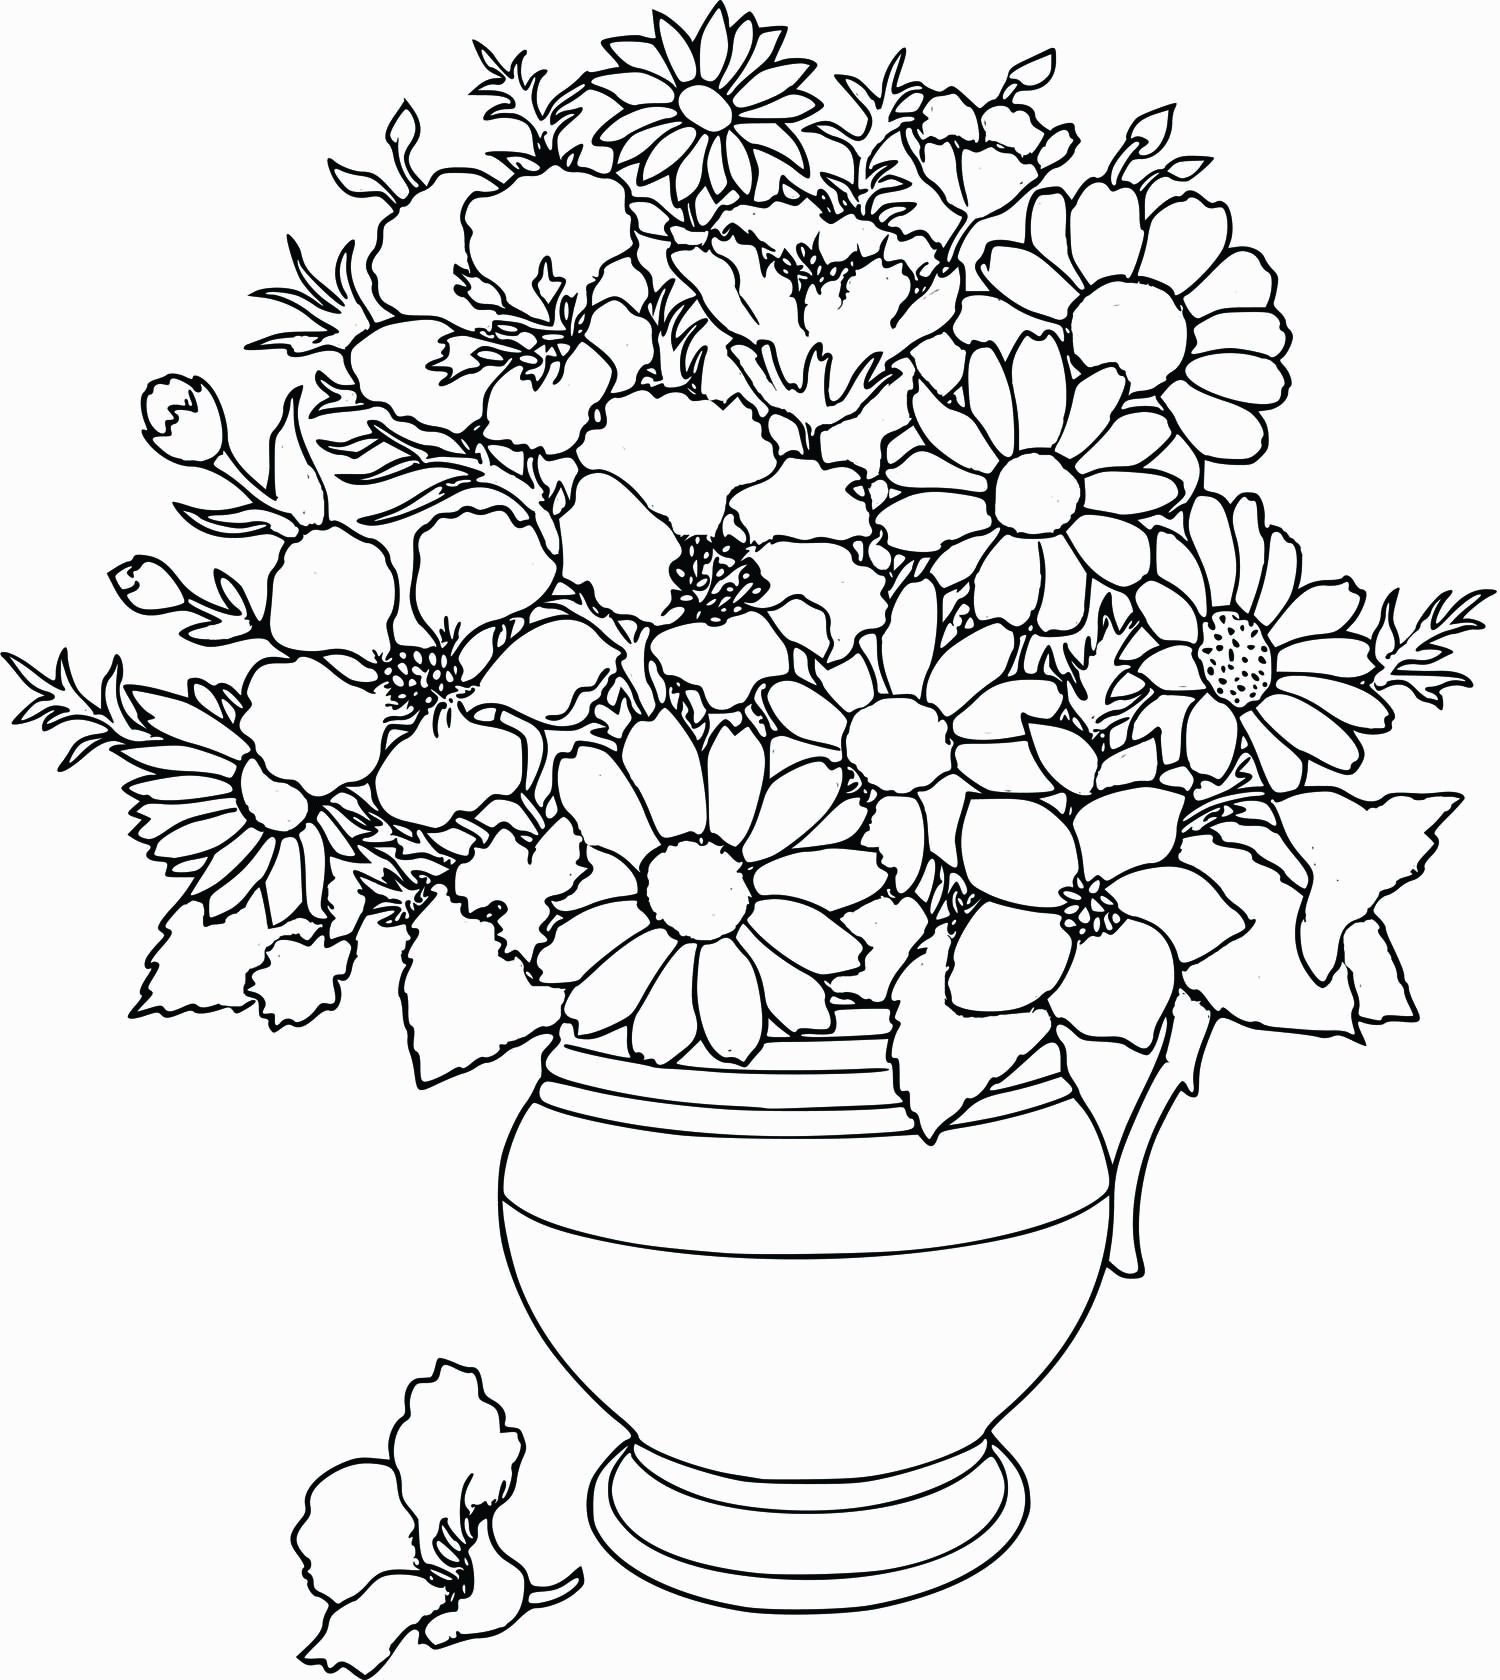 232 Simple Cool Coloring Pages Of Flowers for Kids